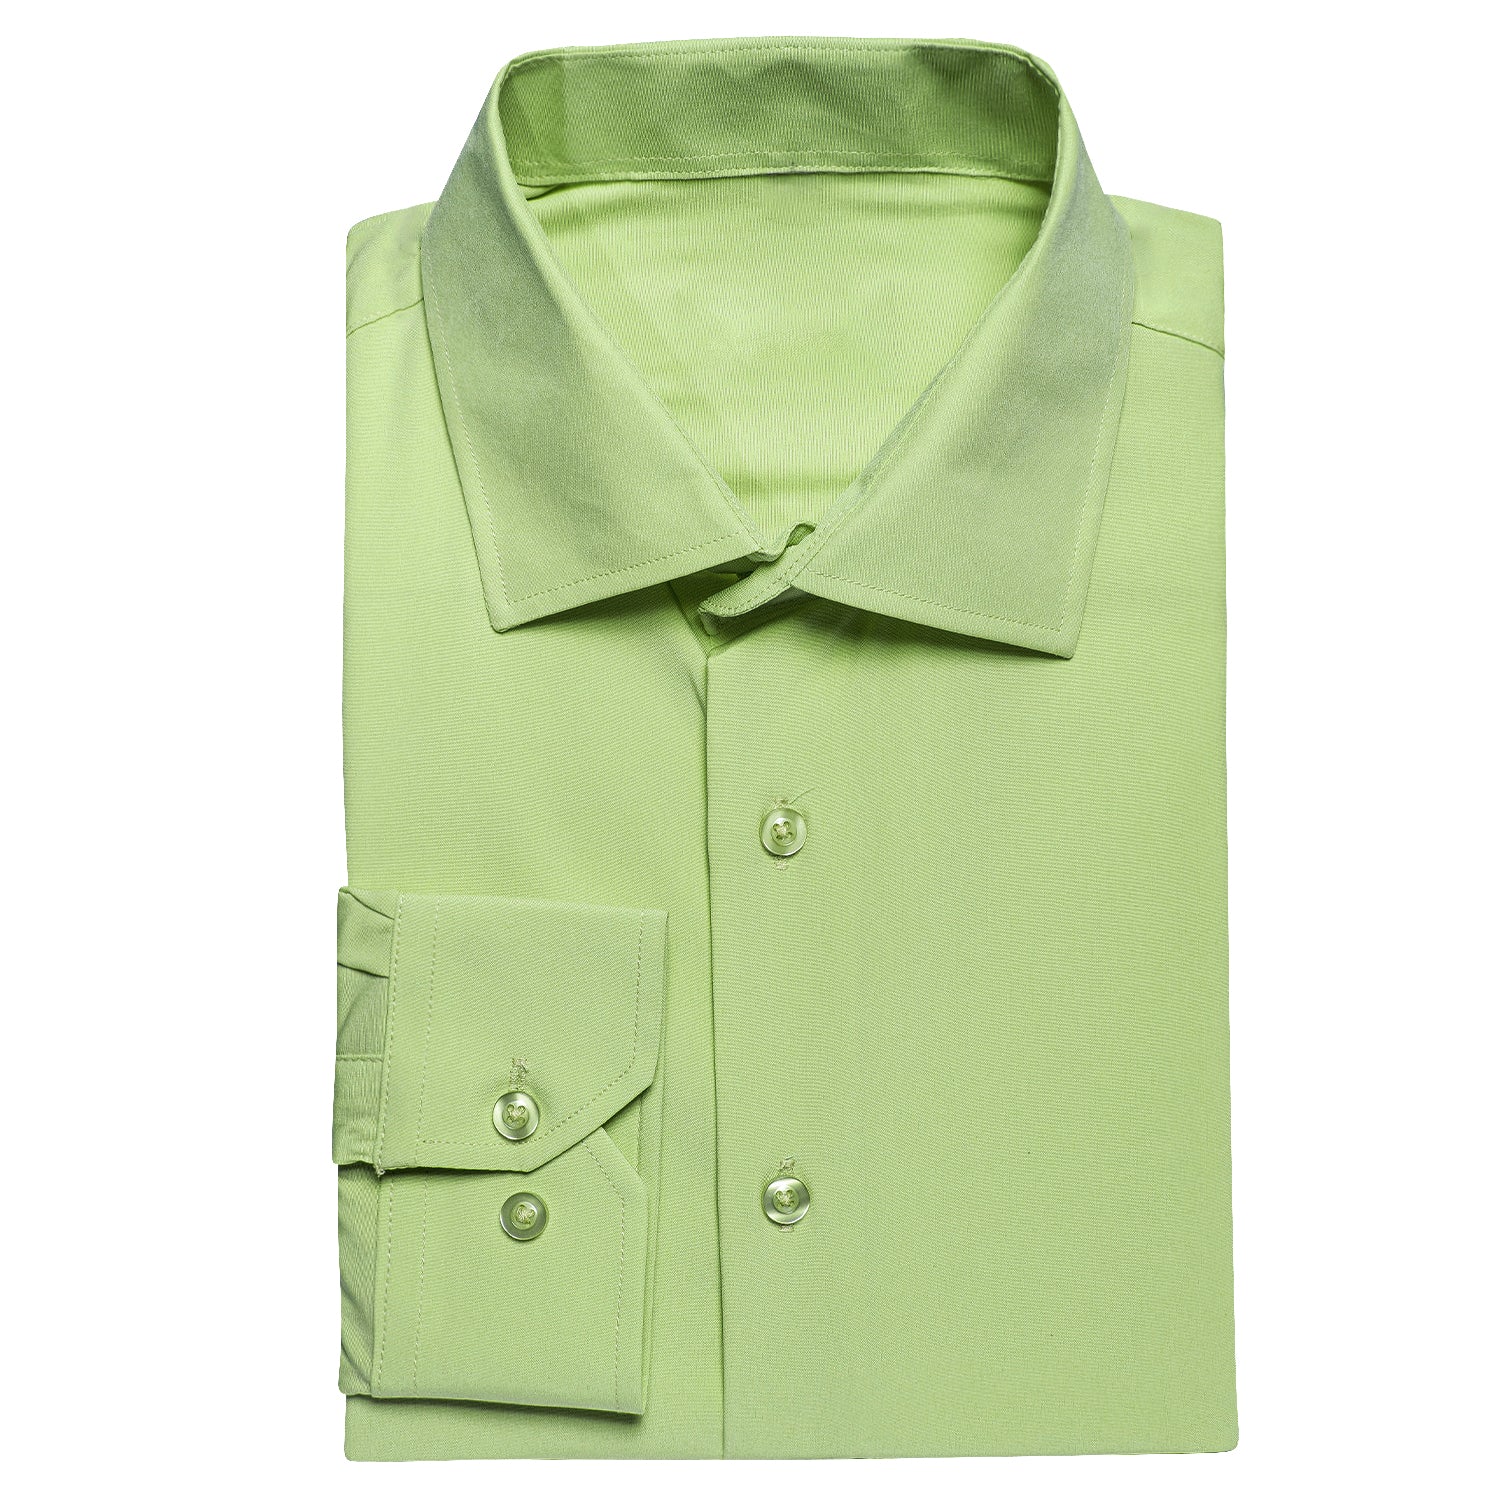 New Apple Green Solid Stretch Men's Long Sleeve Shirt